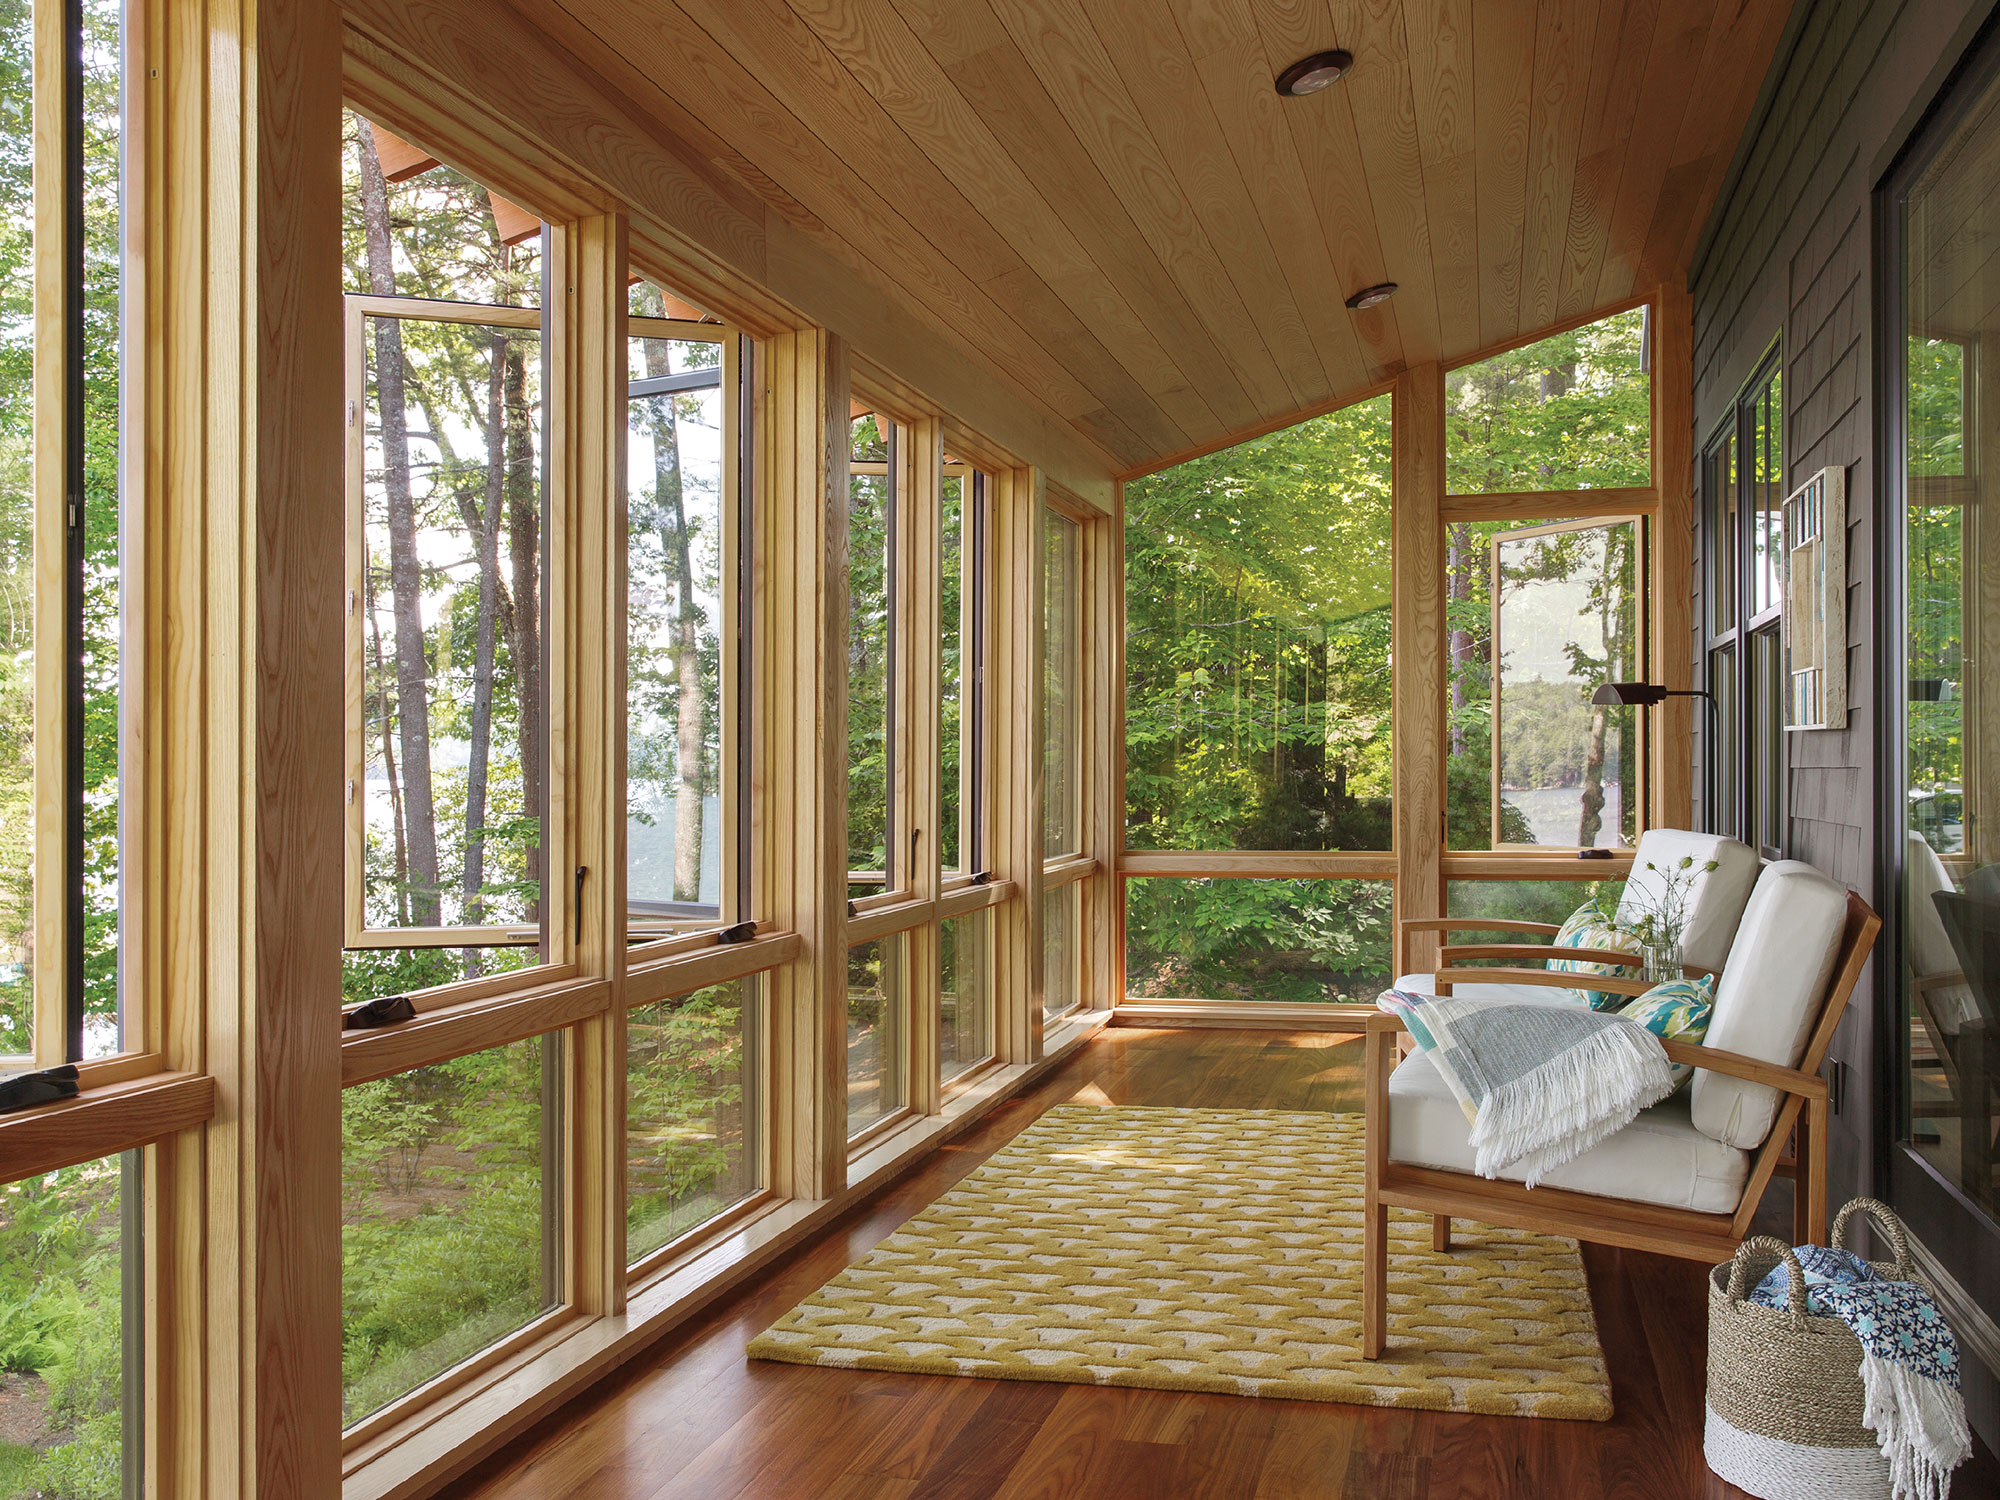 floor to ceiling windows line the perimeter of a porch structure